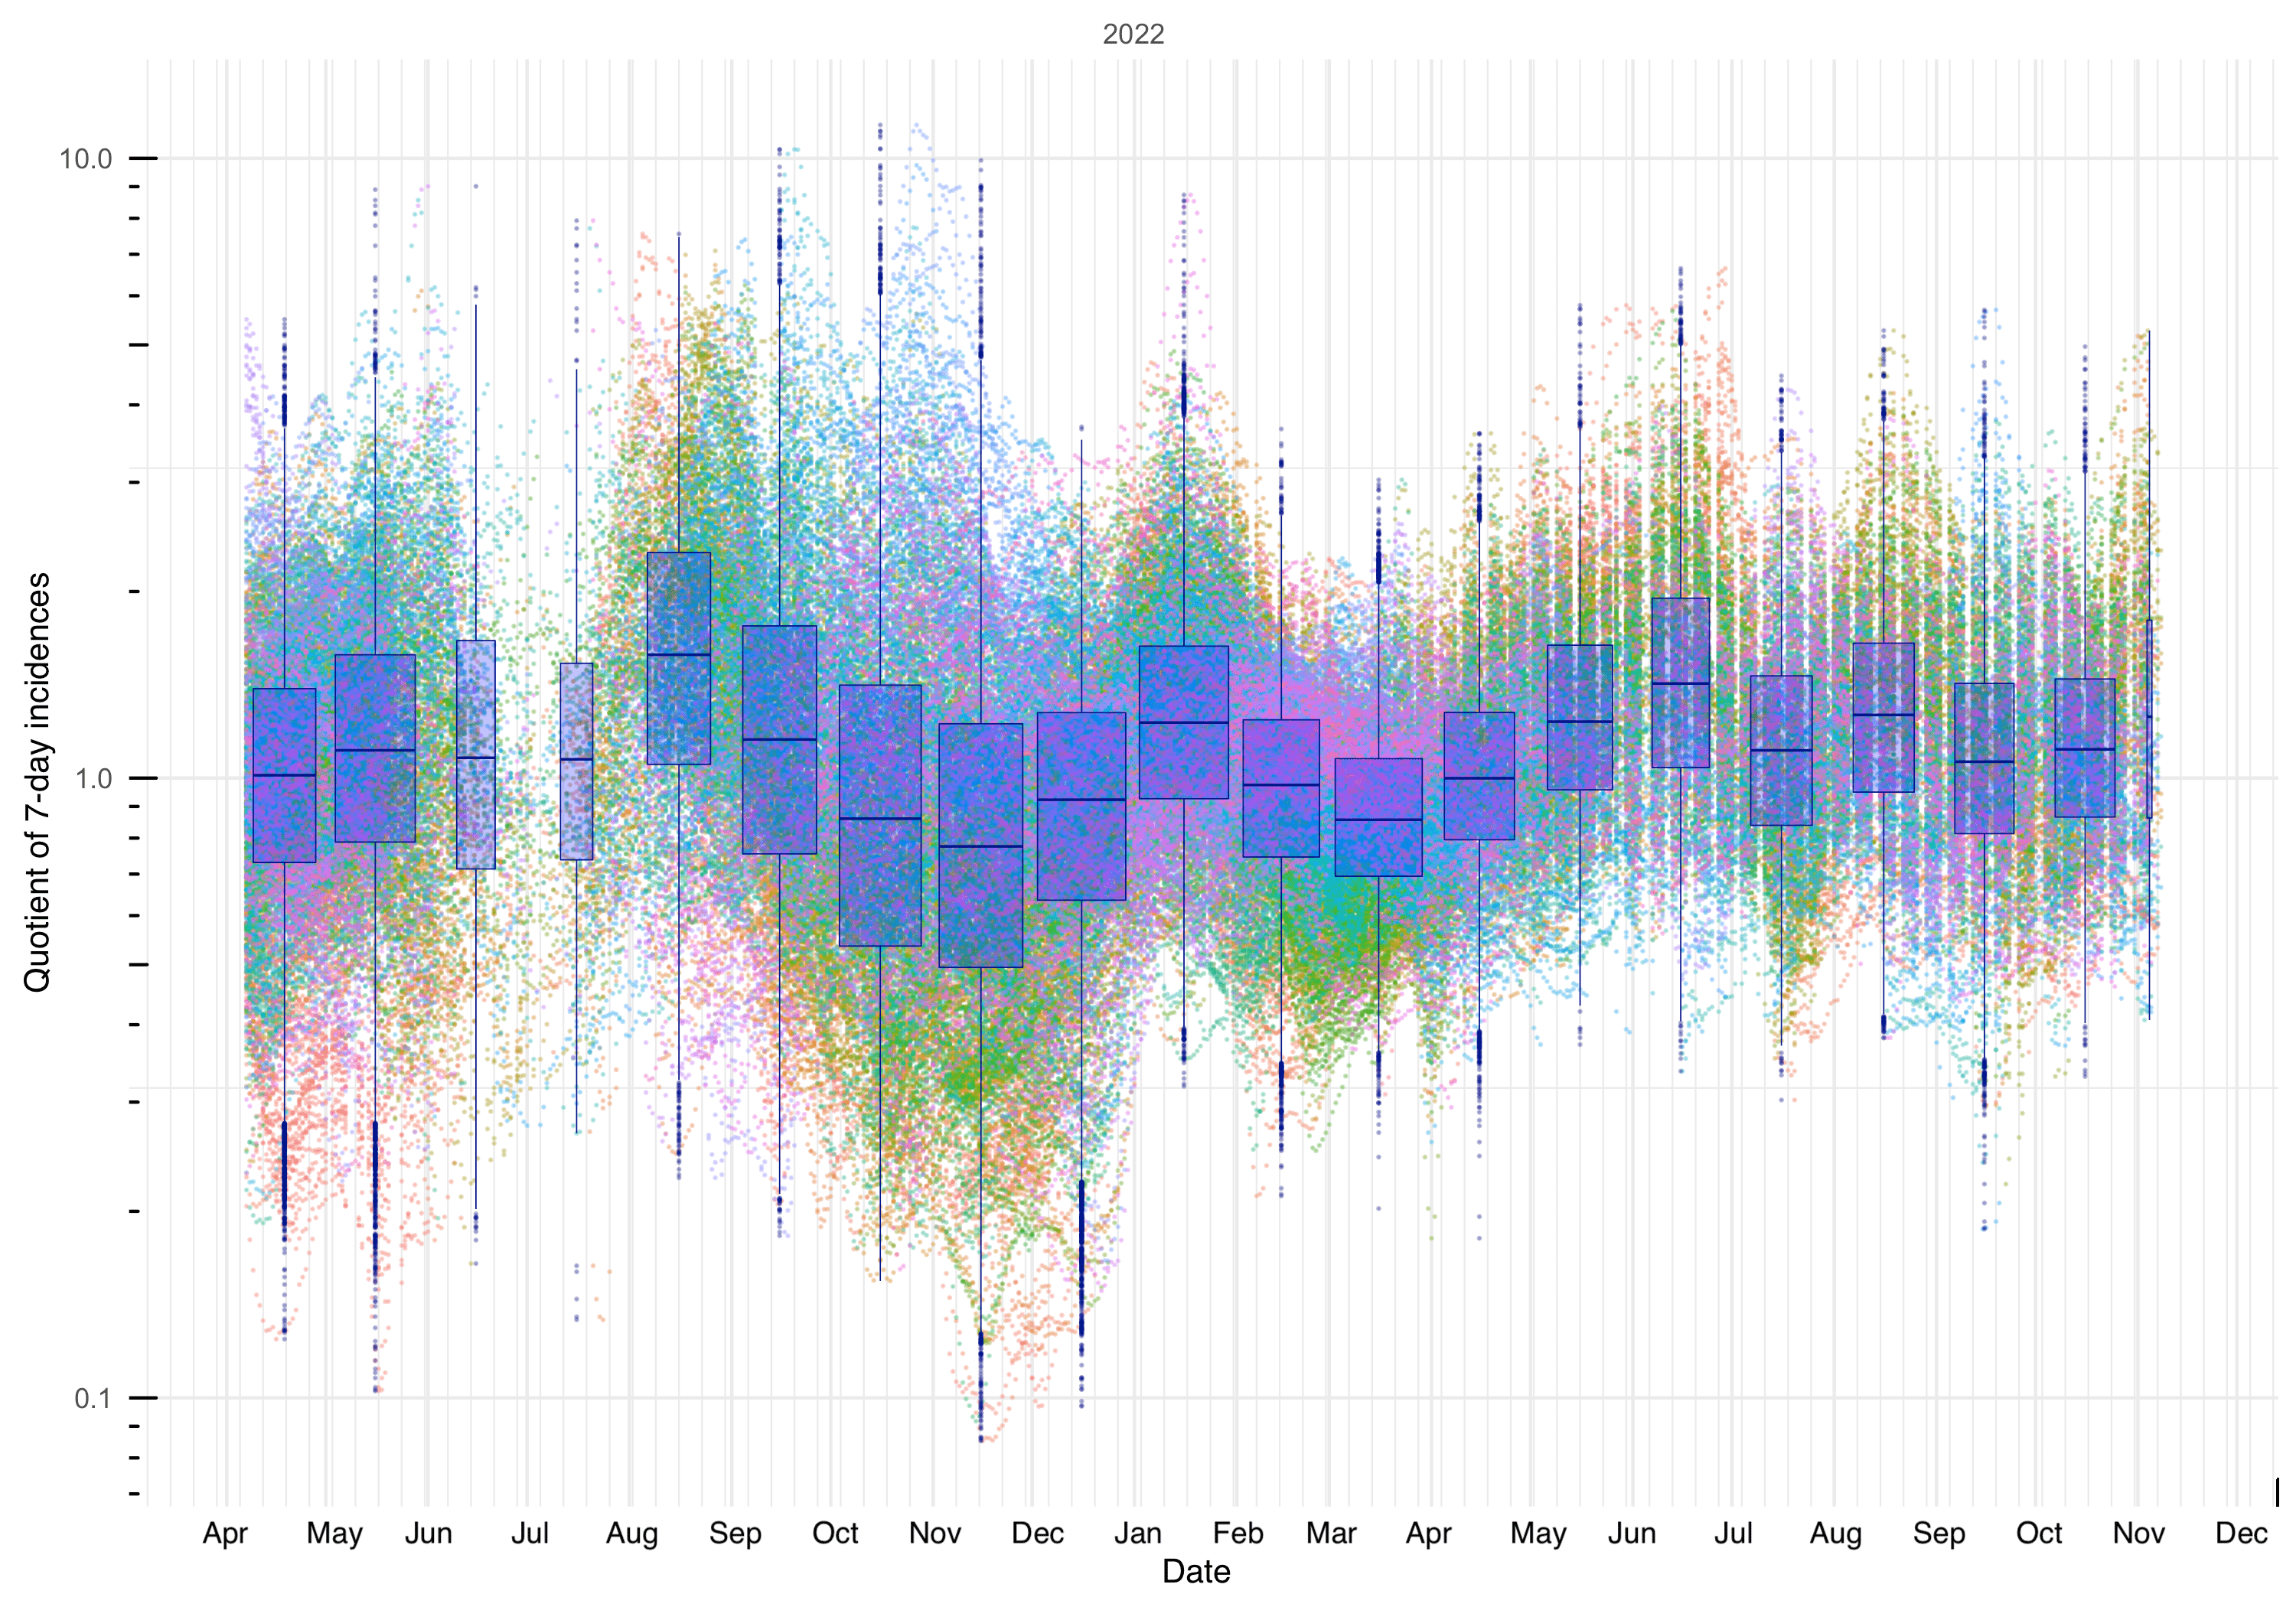 Figure 3: Quotient of 7-day incidences over time (50 pairs of districts).